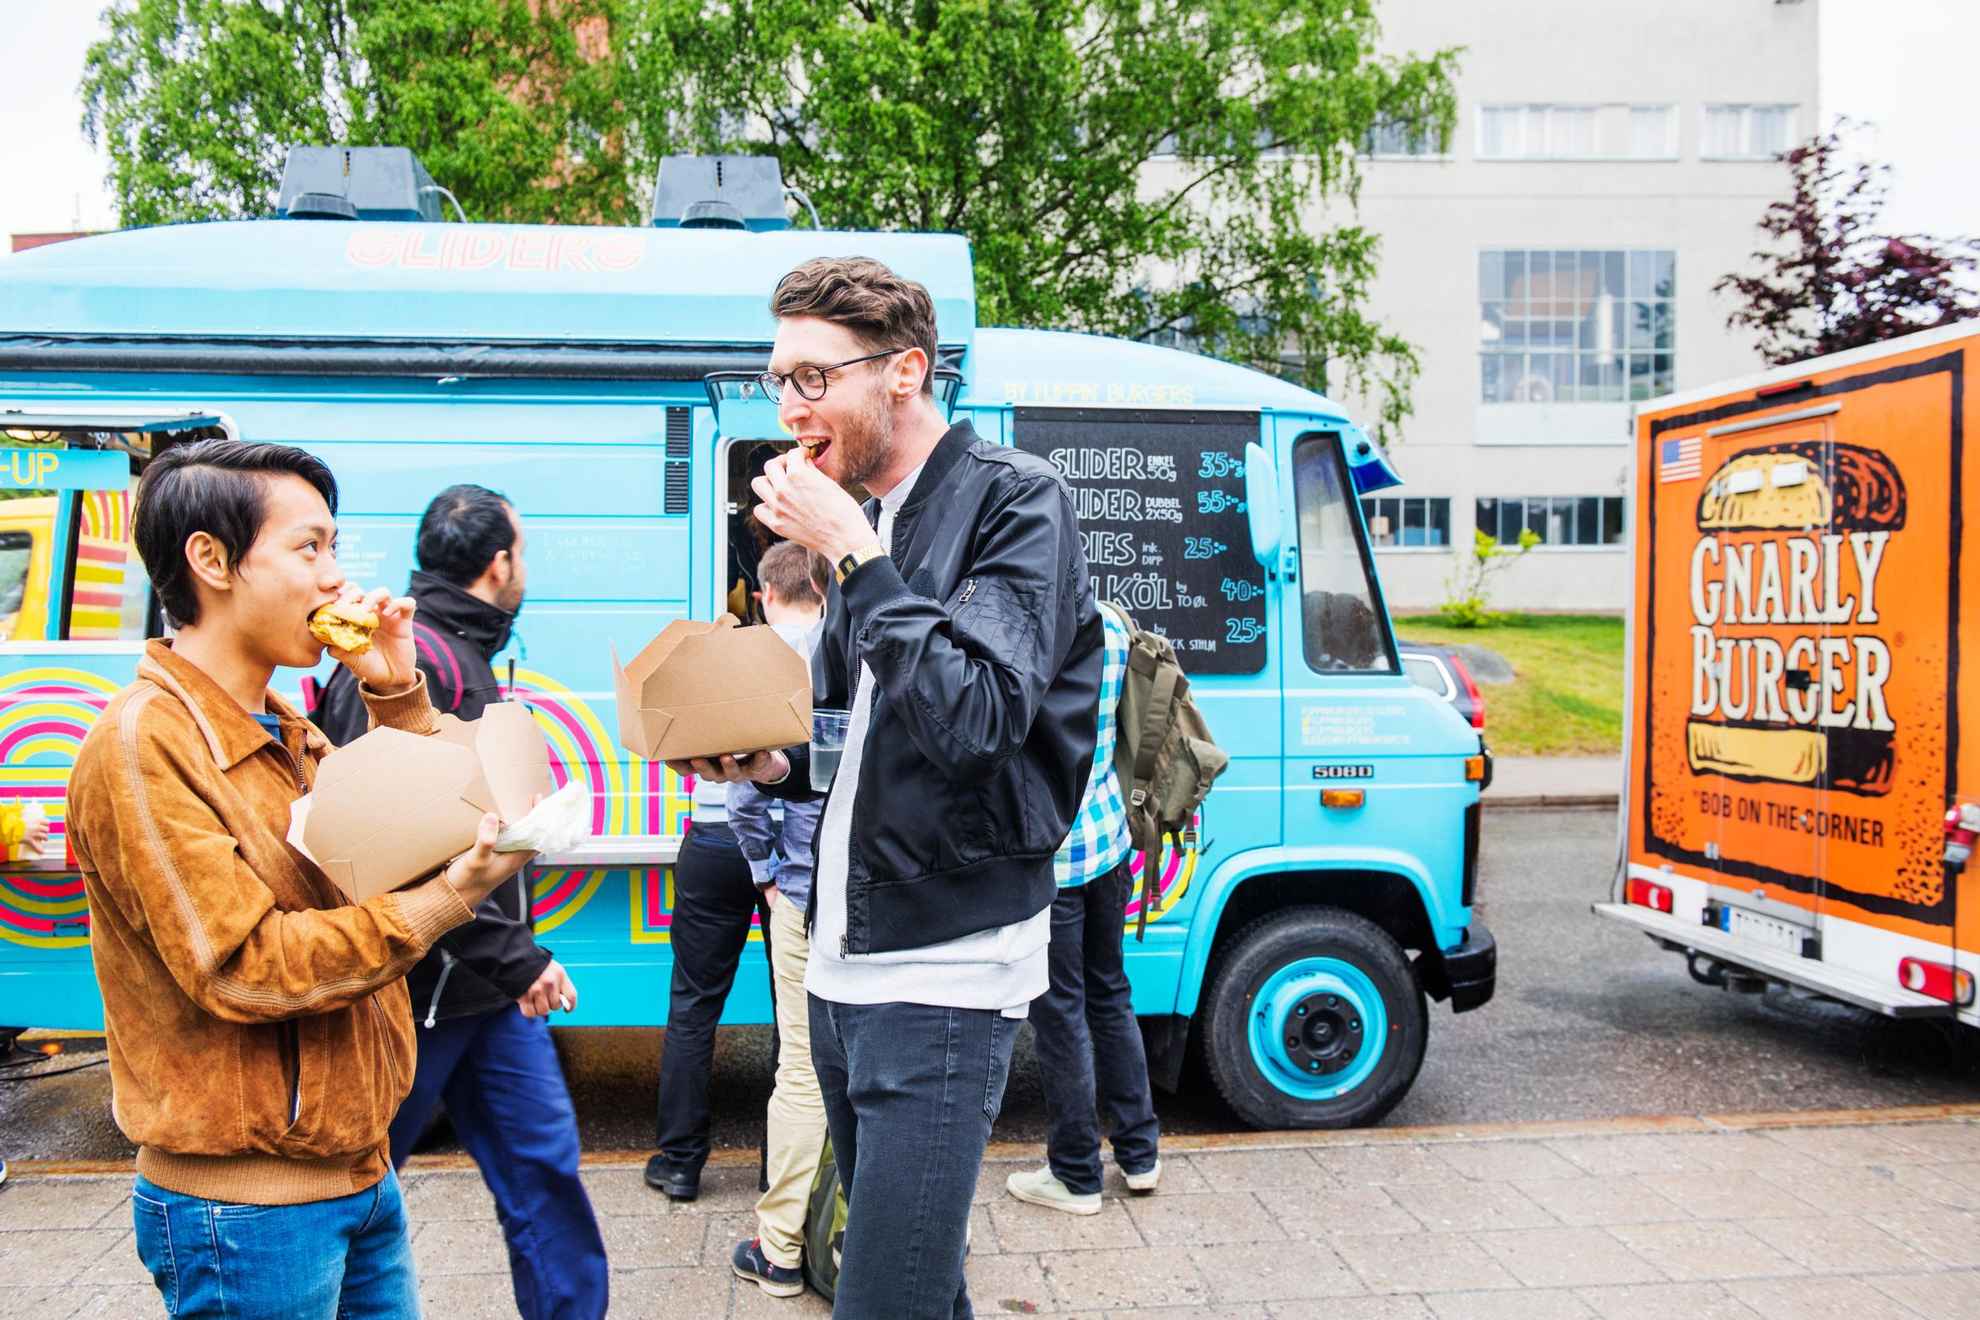 Friends are eating finger food out of boxes by a food truck parked in Stockholm.